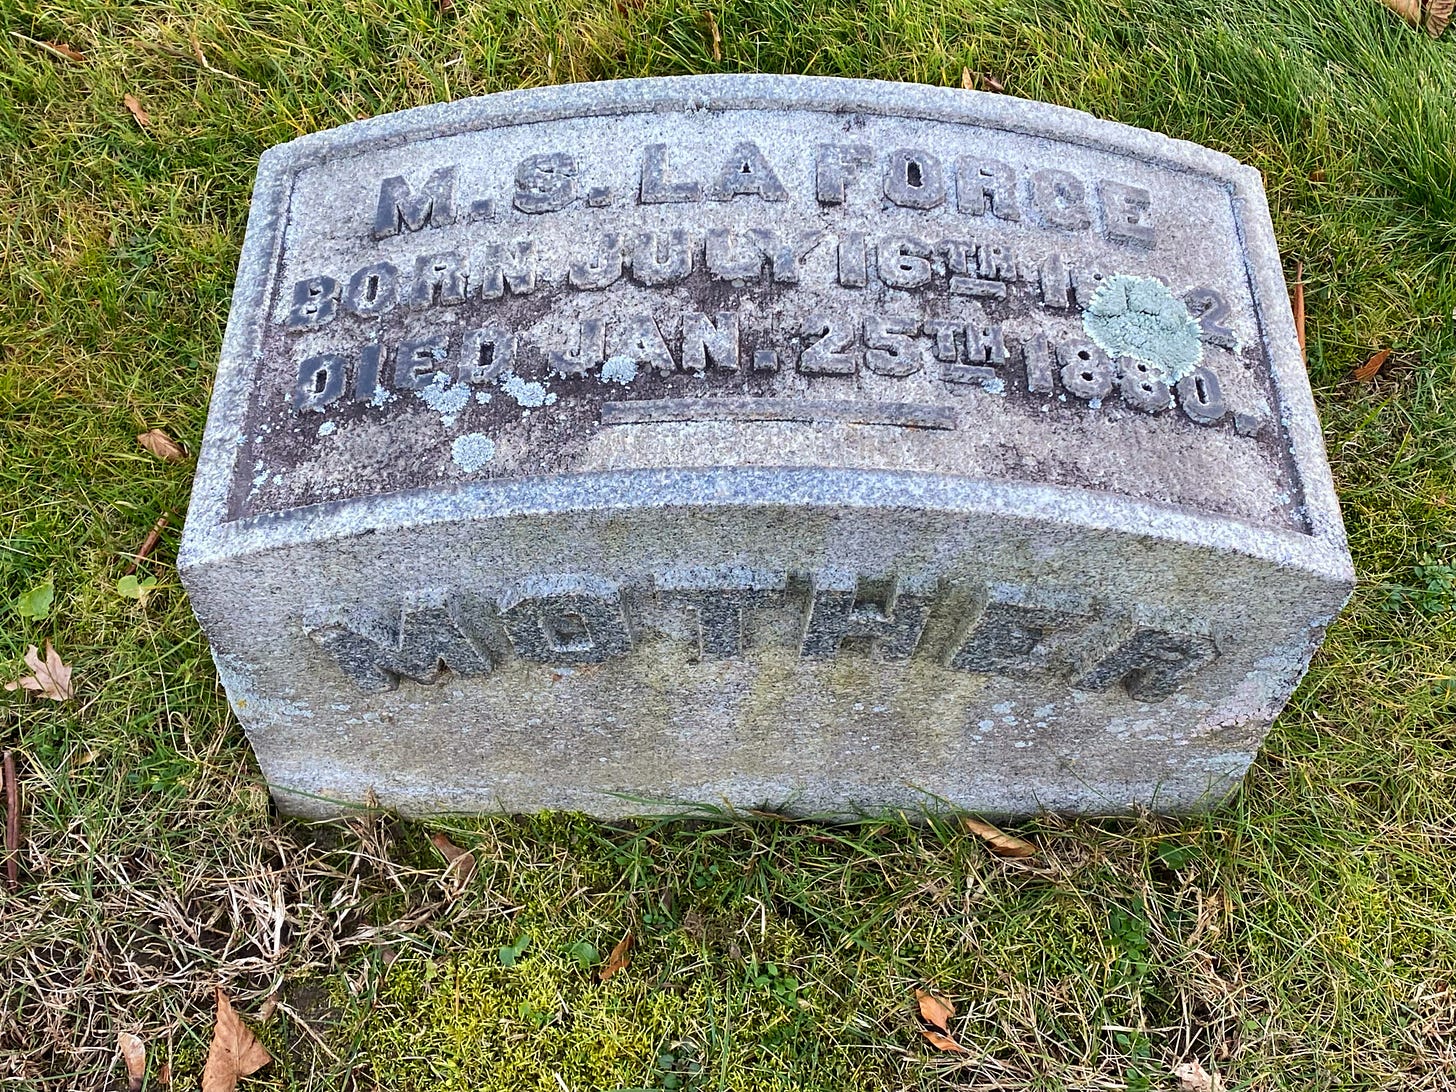 An older headstone engraved M.S. LaForge on the top and "Mother" on the front.